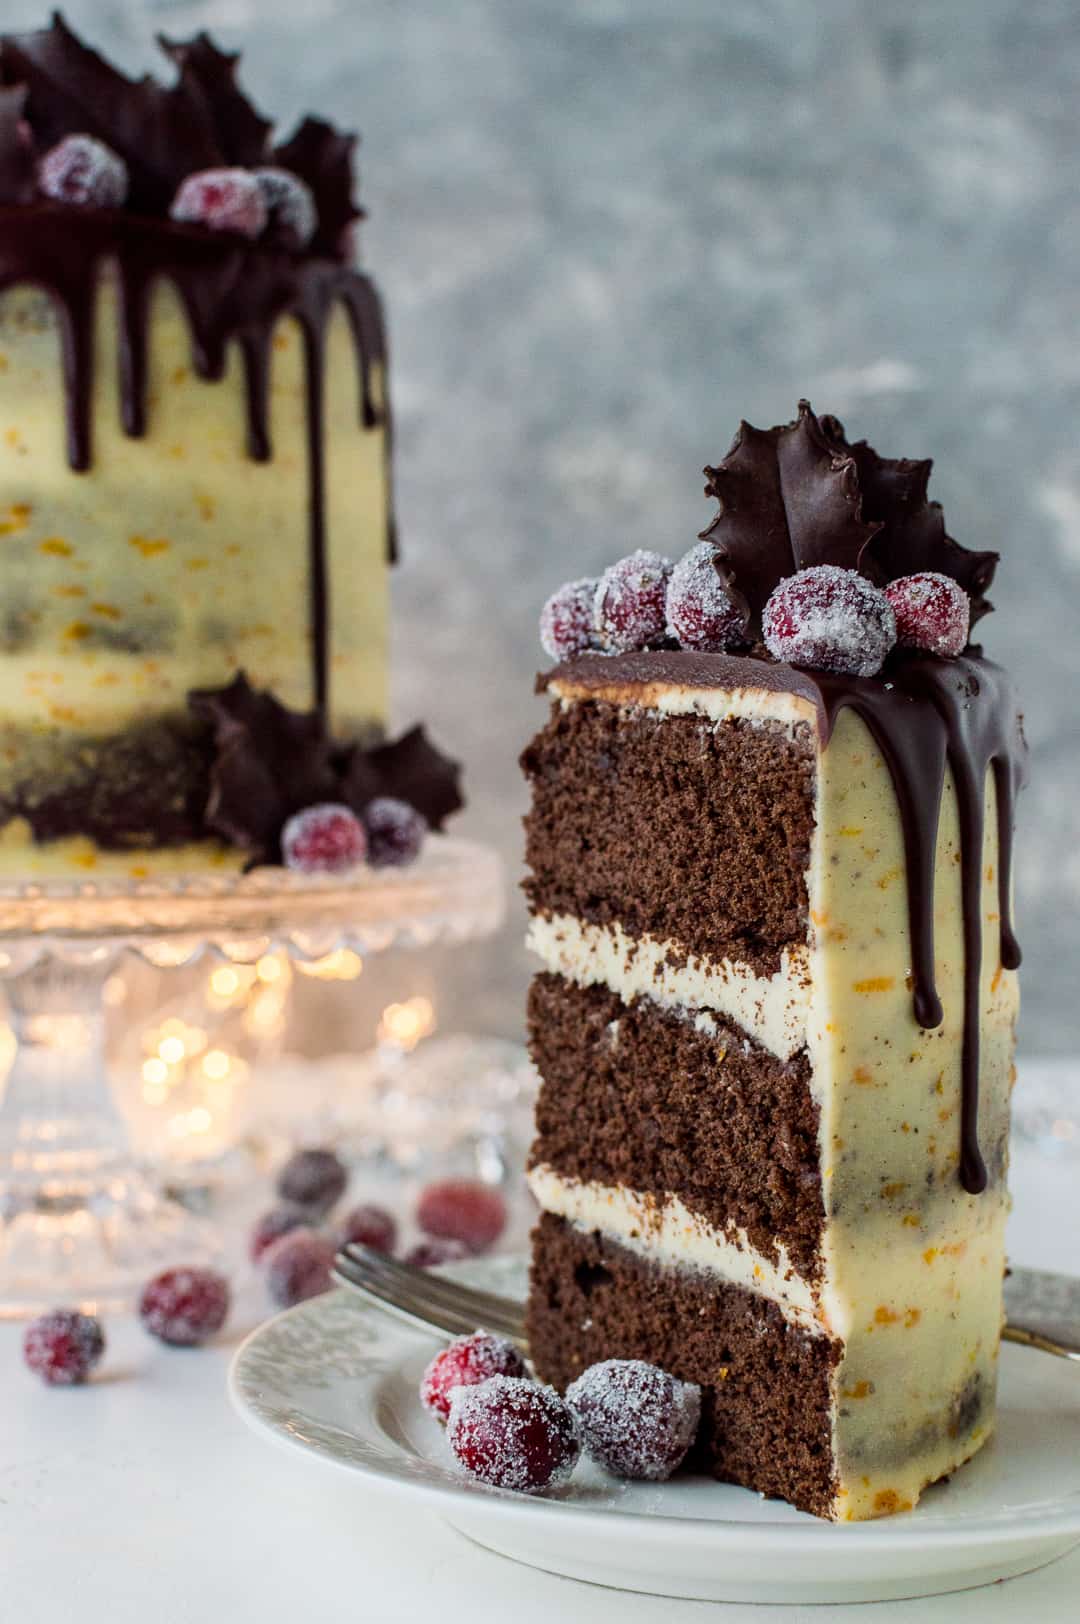 A slice of mulled red wine chocolate cake with orange mascarpone frosting.